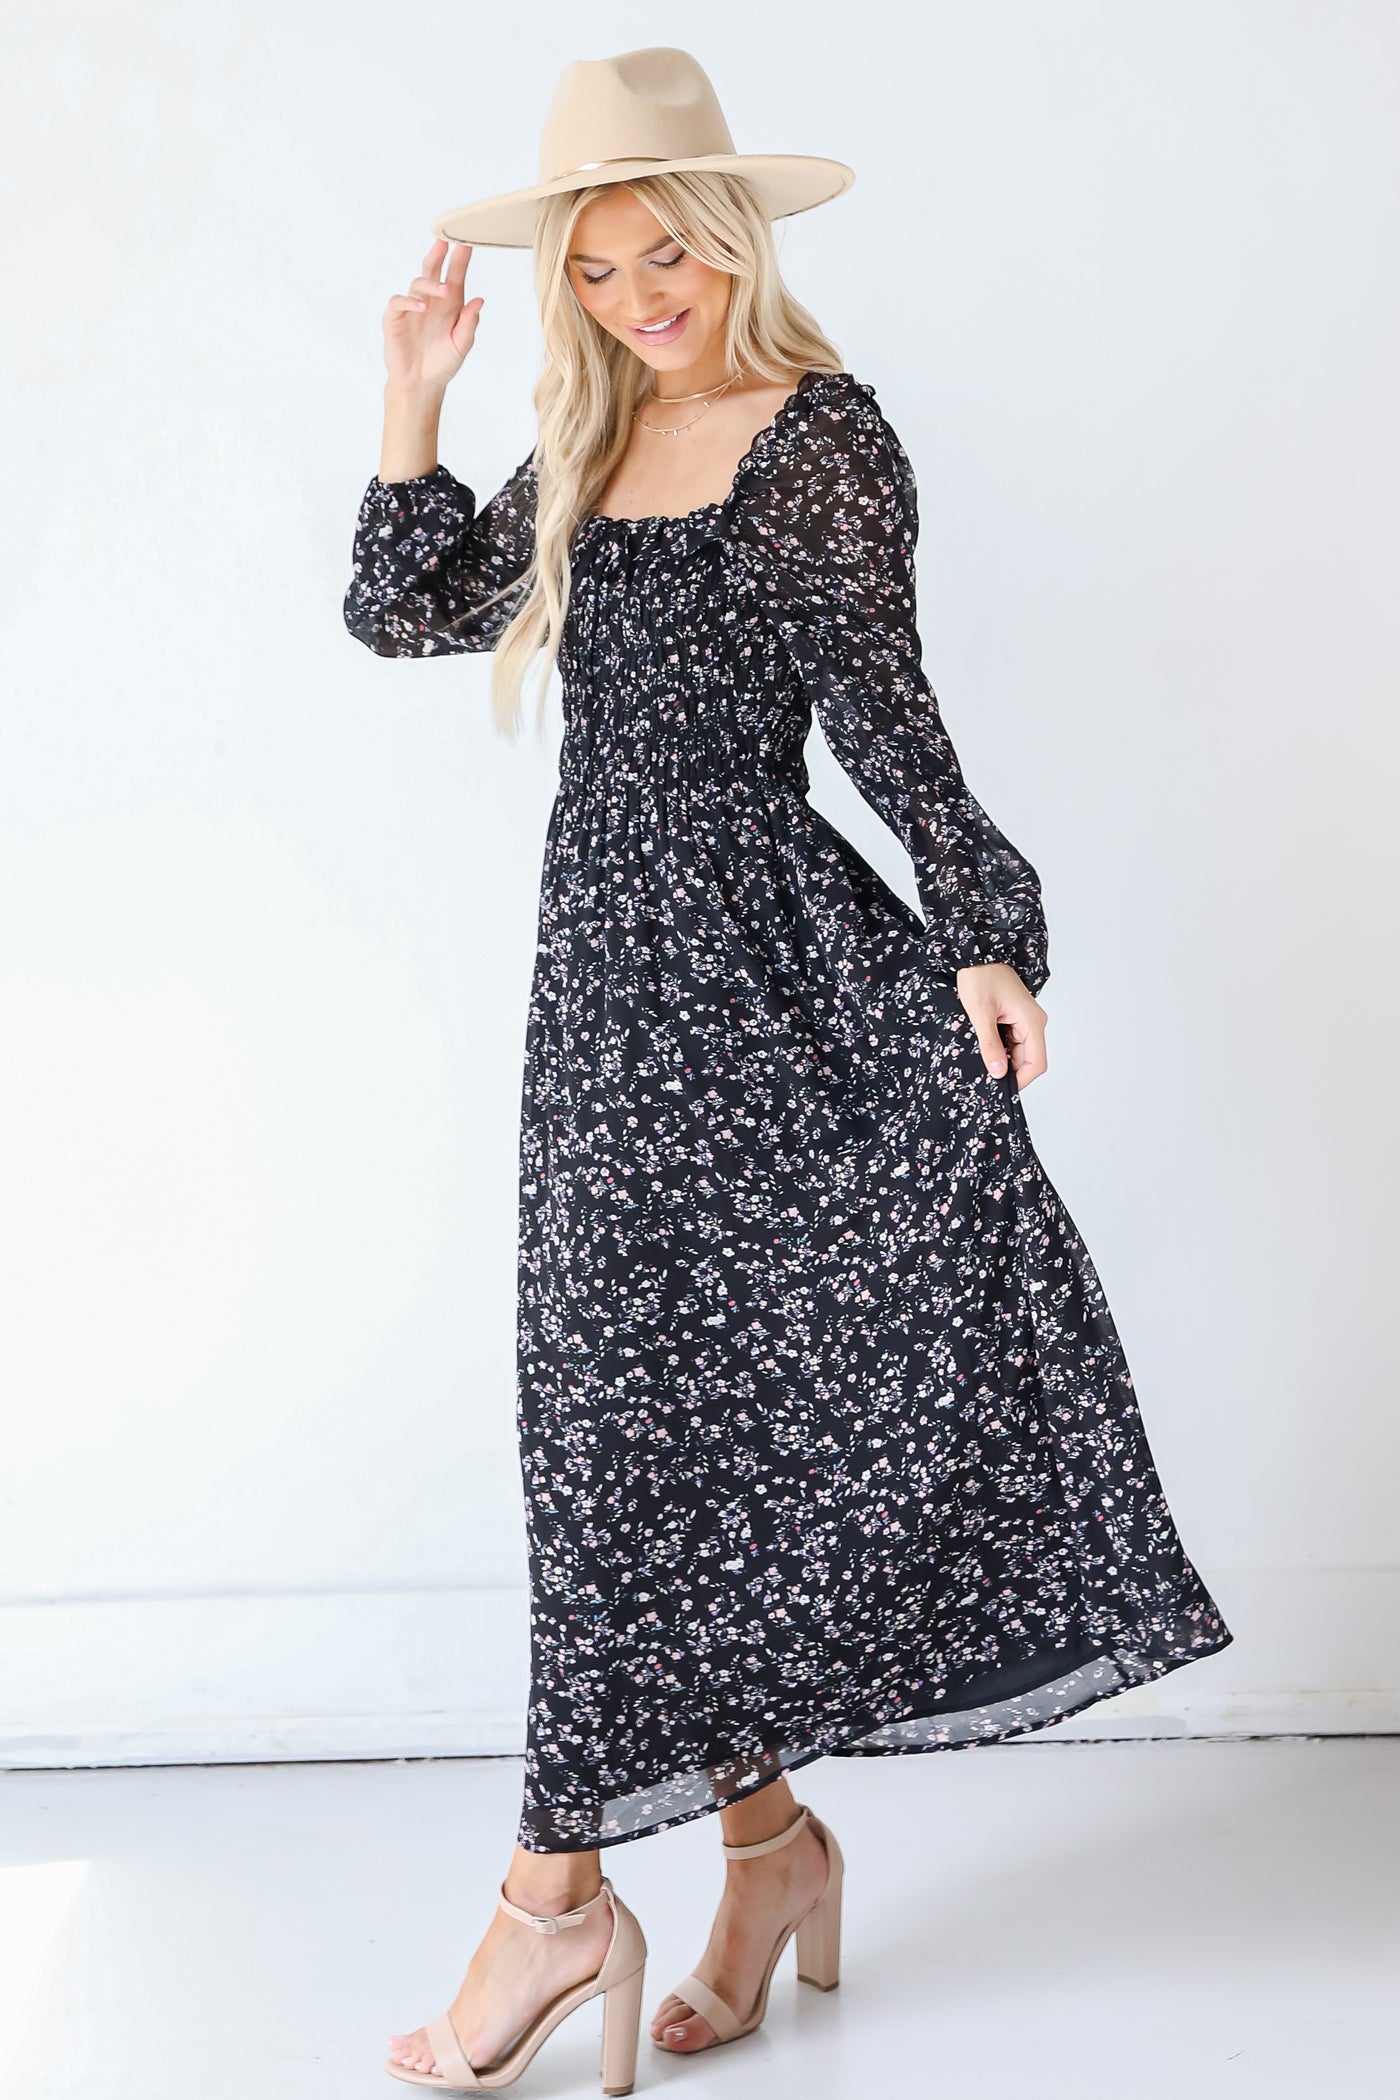 Floral Maxi Dress from dress up